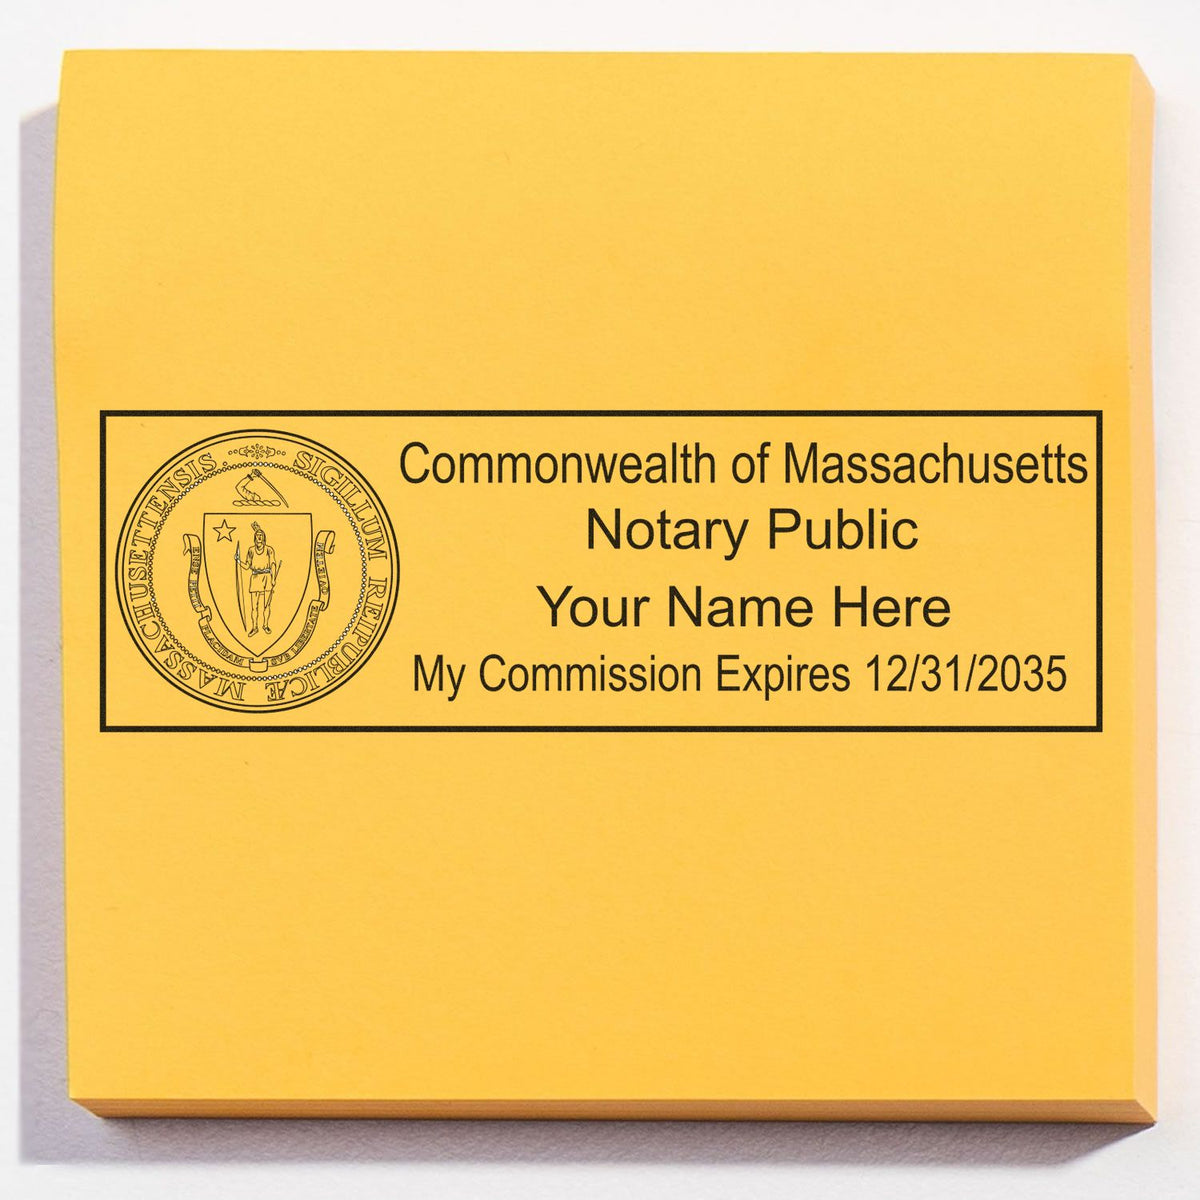 The Slim Pre-Inked State Seal Notary Stamp for Massachusetts stamp impression comes to life with a crisp, detailed photo on paper - showcasing true professional quality.